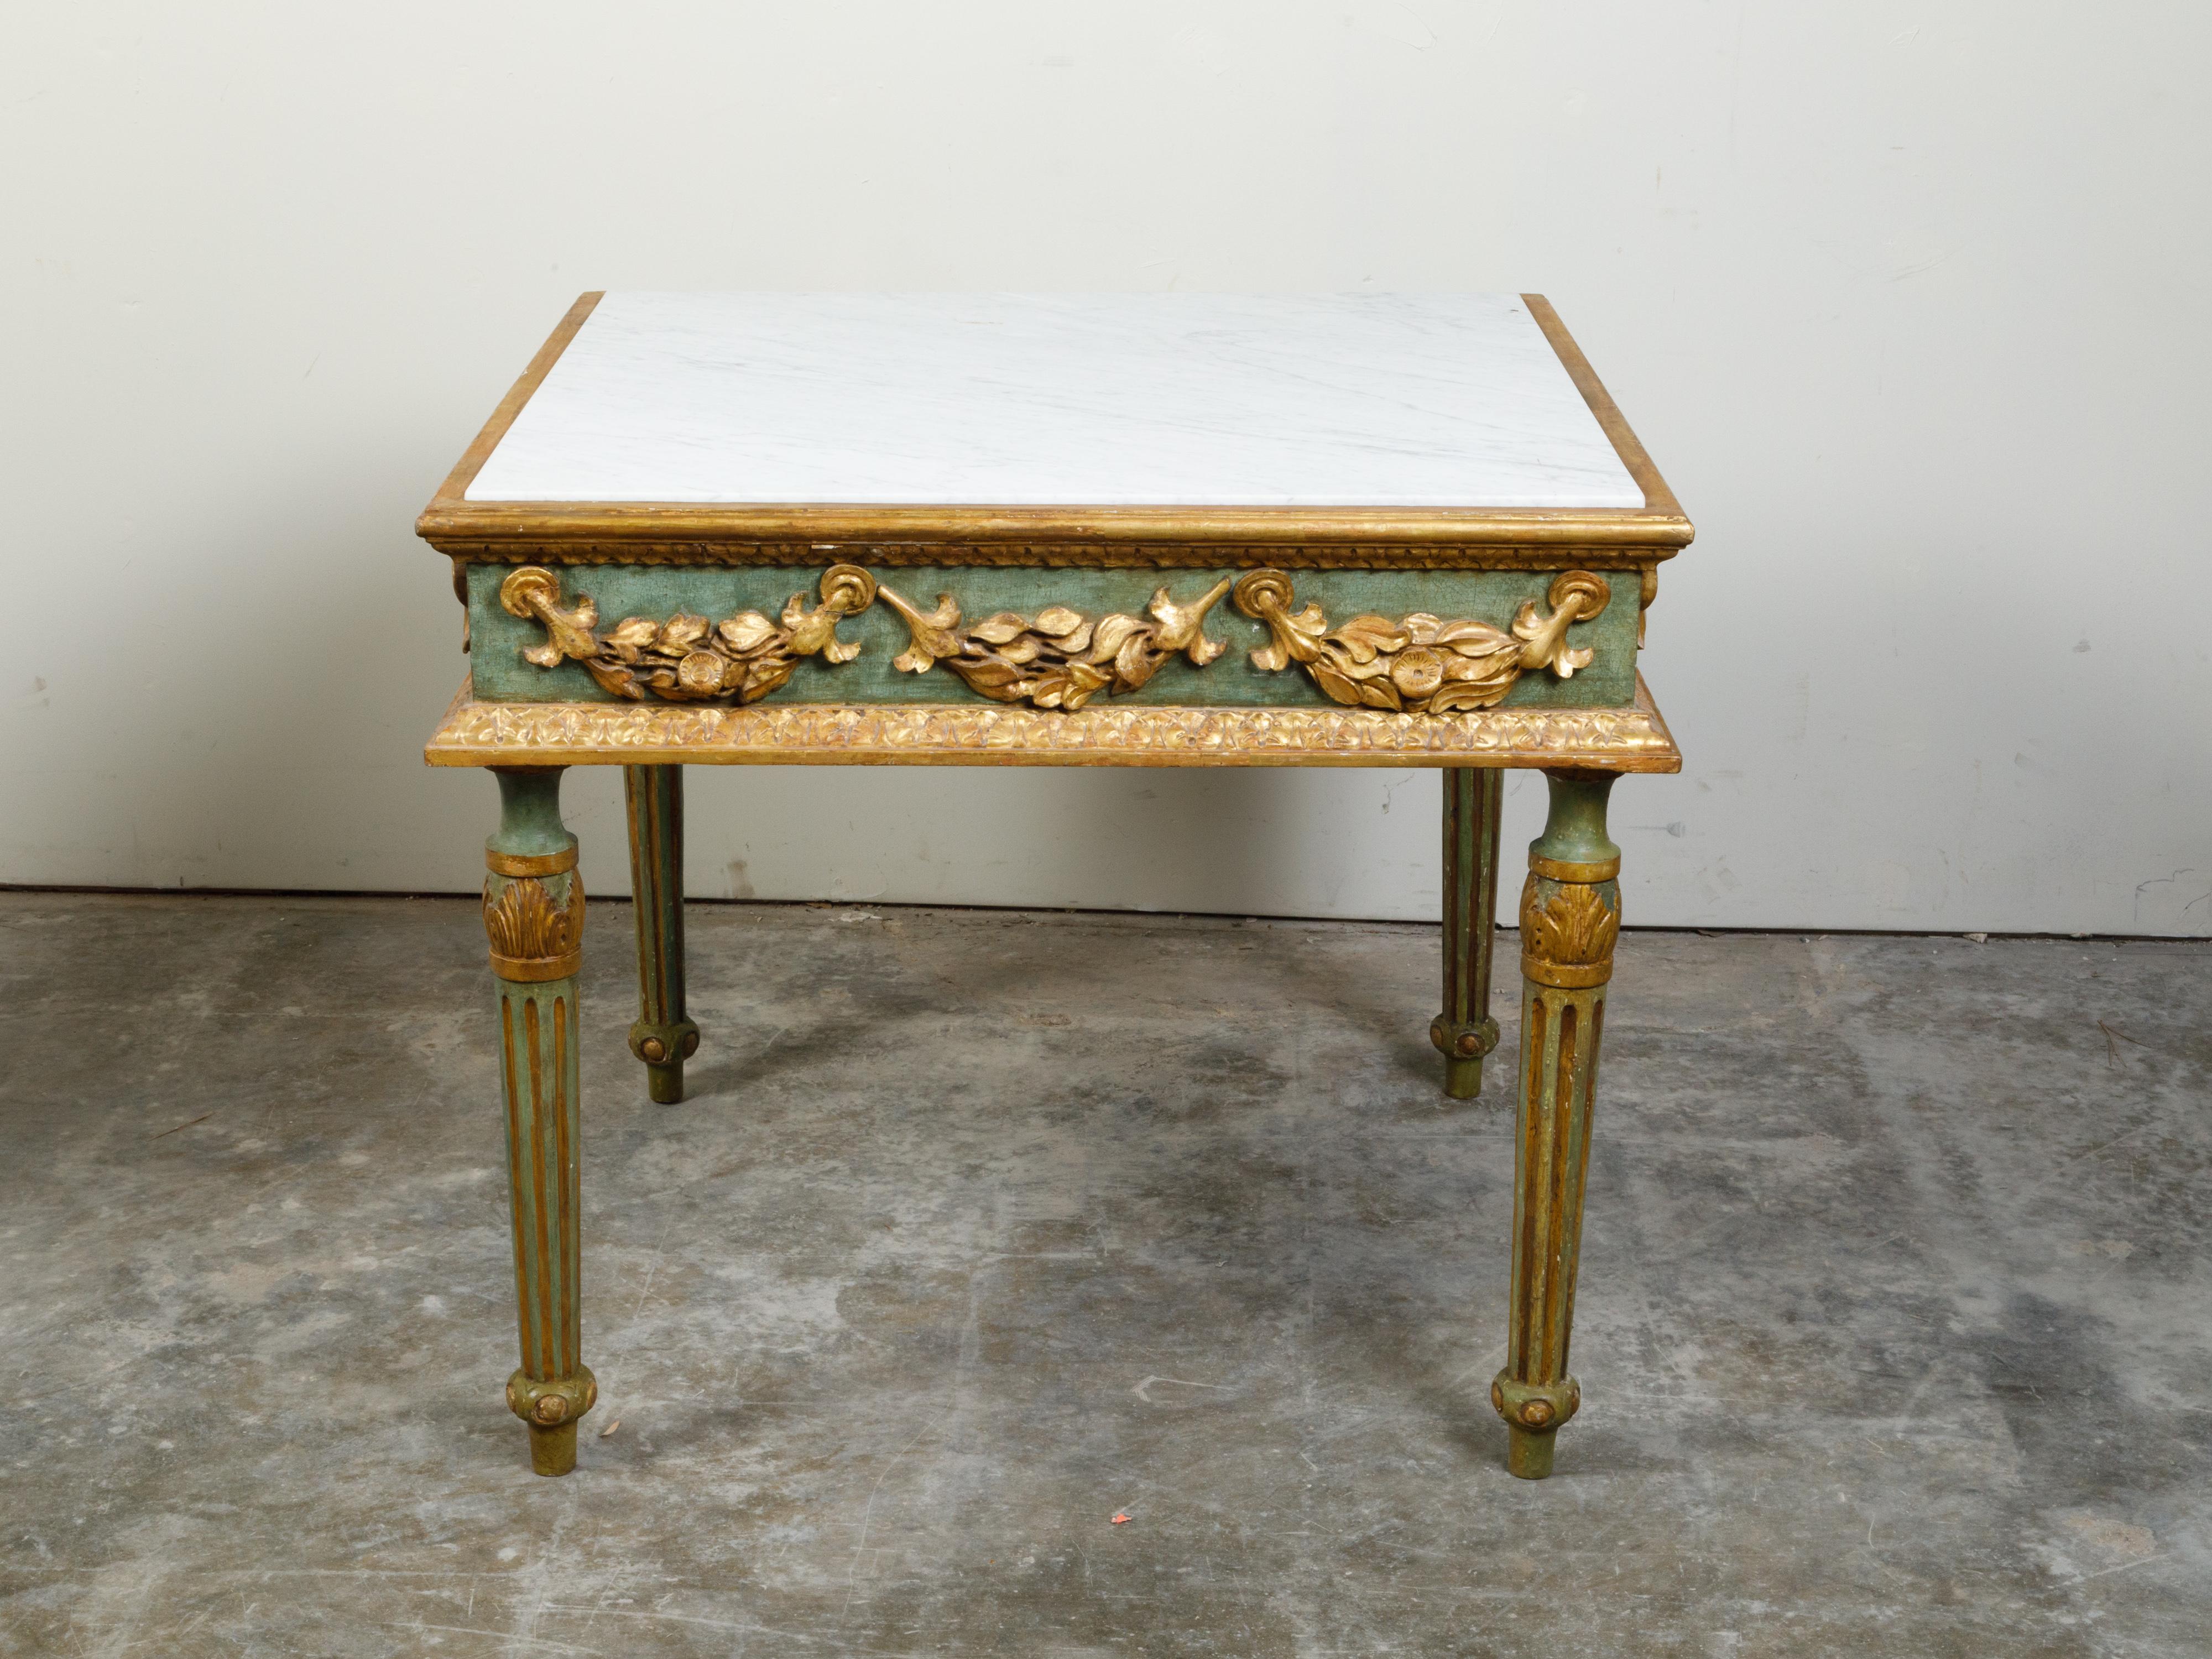 An Italian Neoclassical period painted and parcel-gilt center table from the 18th century, with white marble top and carved garlands. Created in Italy during the 18th century, this center table features a square white marble top sitting above a